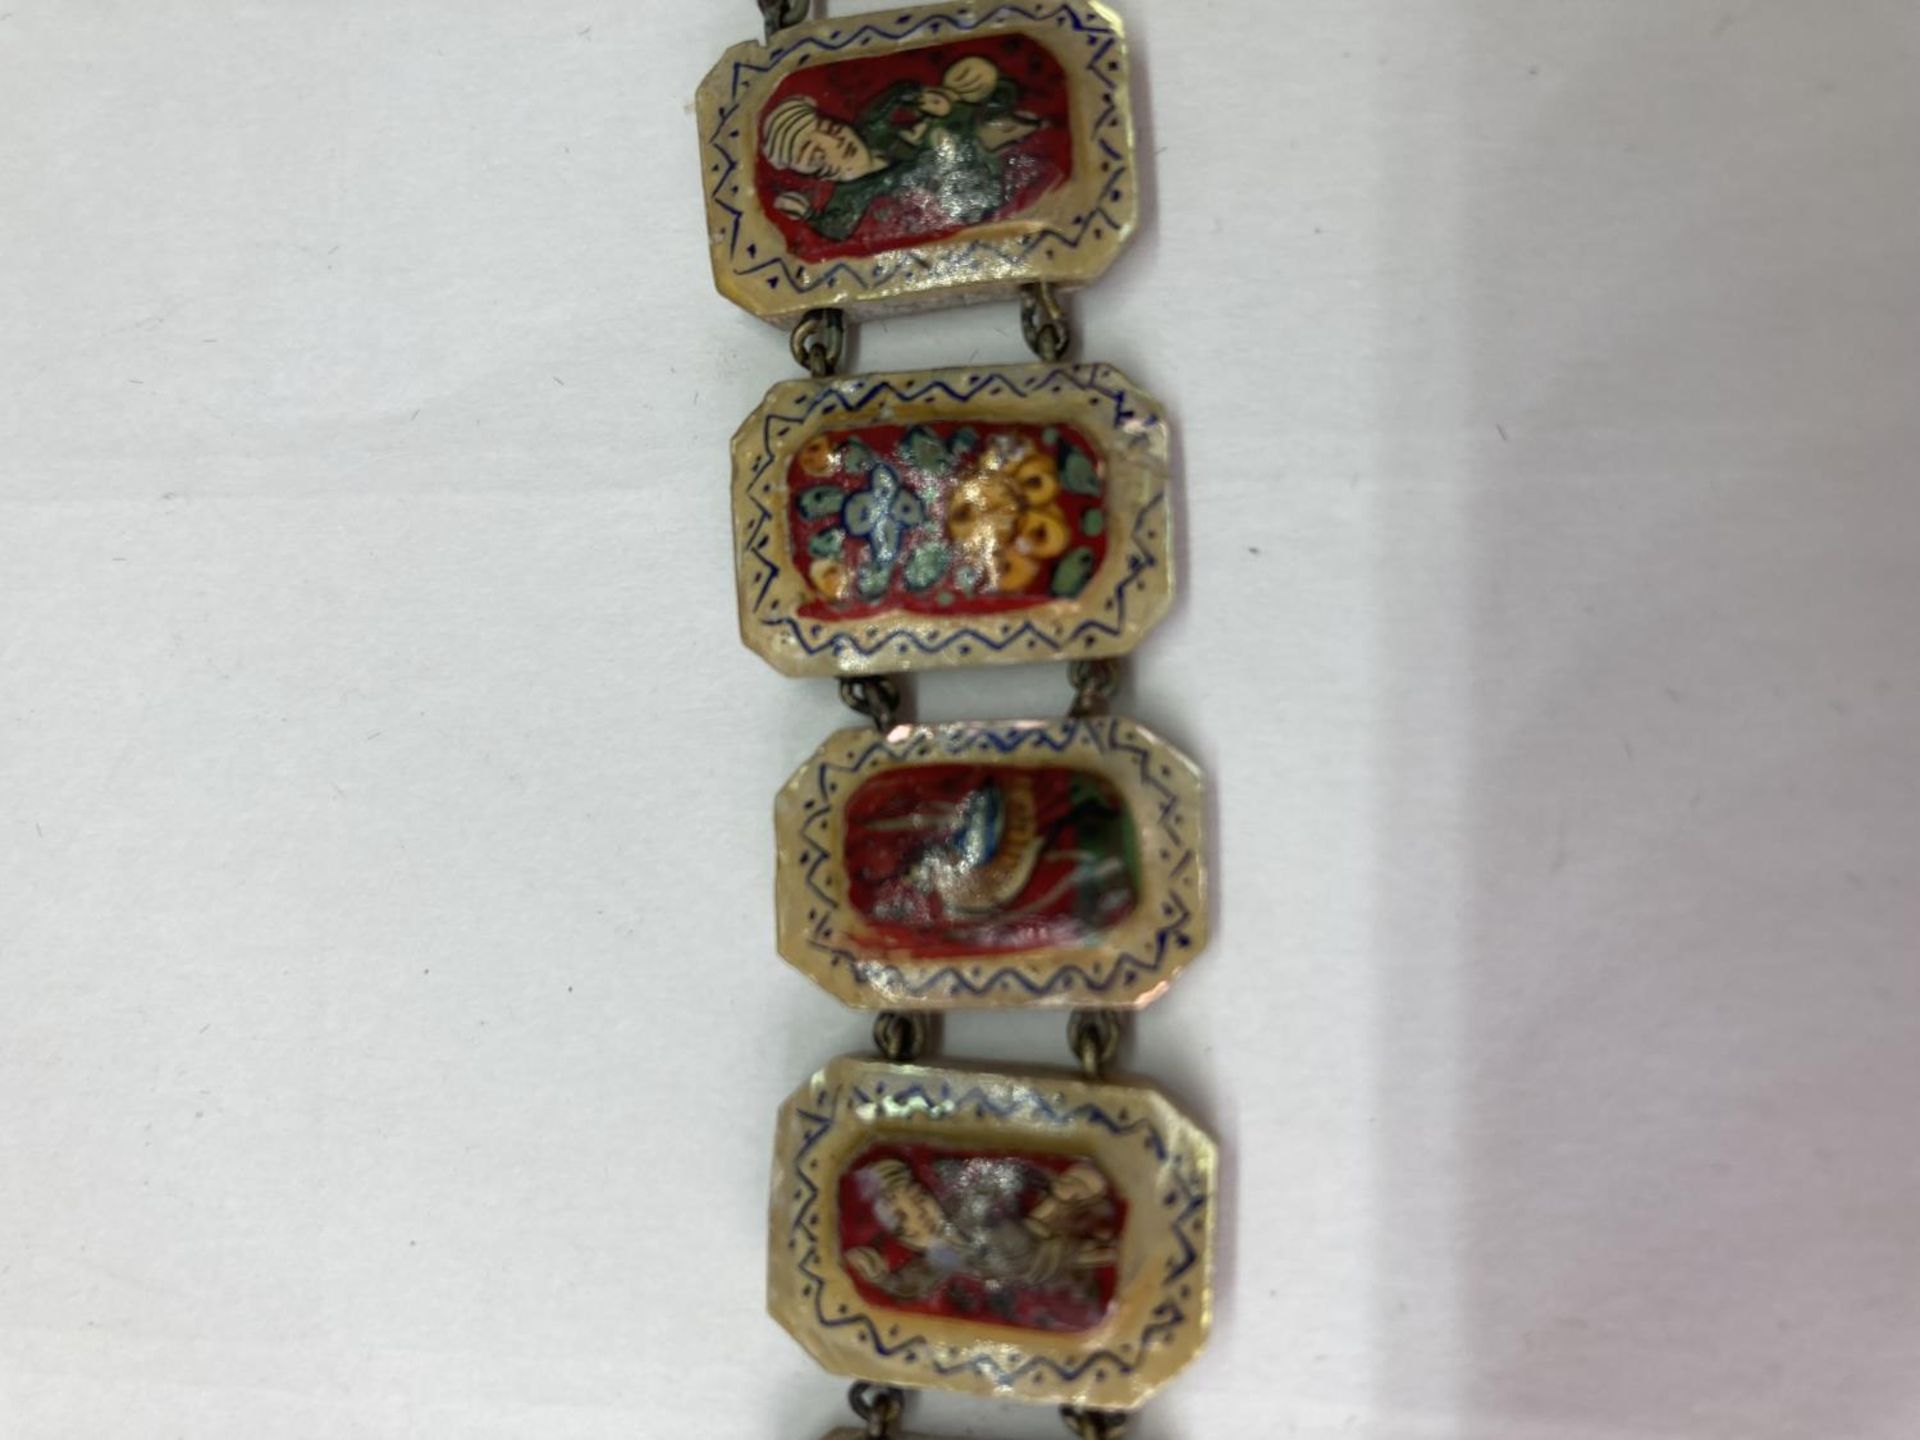 A DECORATIVE HAND PAINTED PERSIAN MOTHER OF PEARL BRACELET IN A PRESENTATION BOX - Image 8 of 12